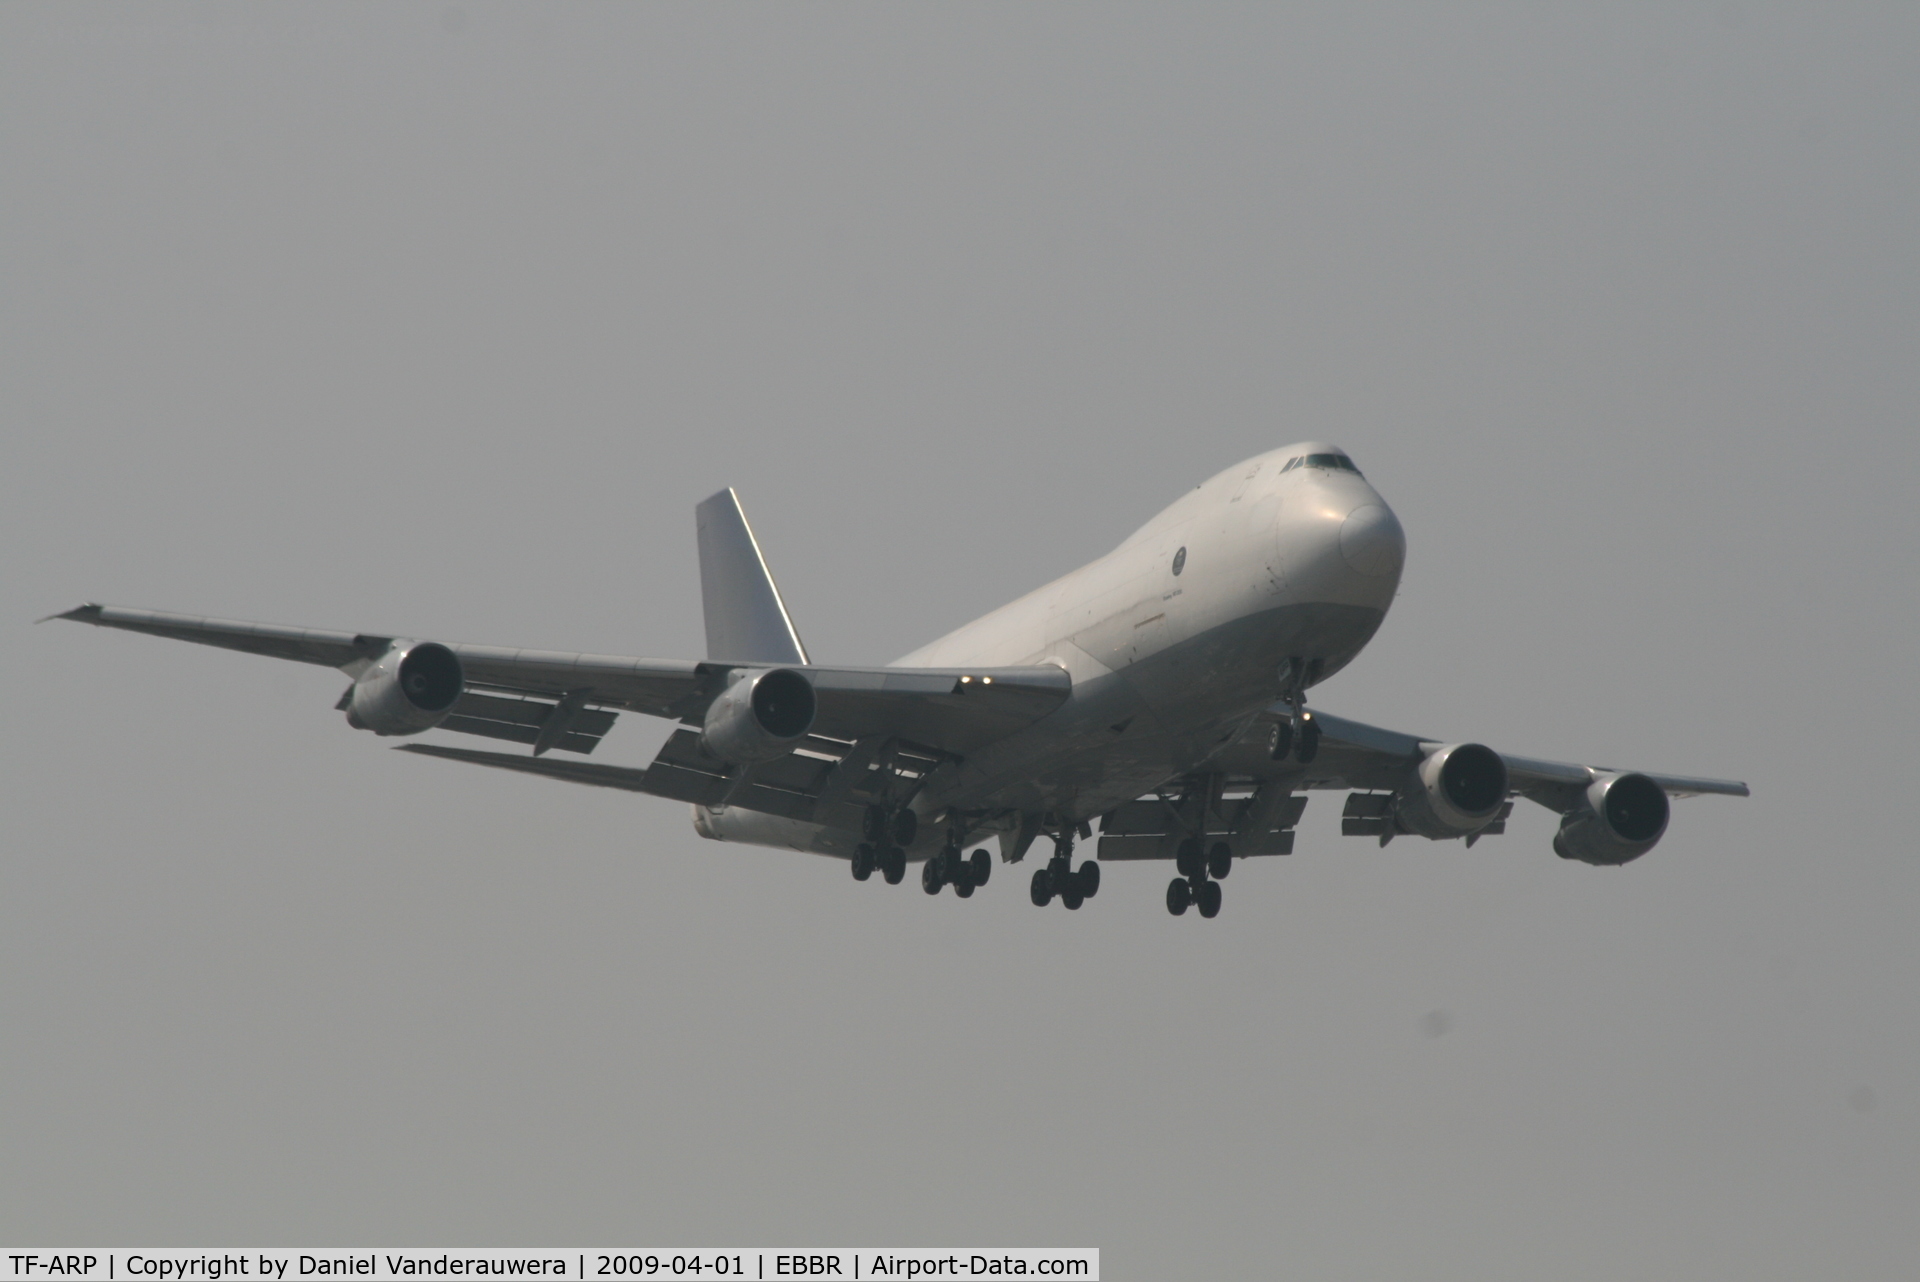 TF-ARP, 1985 Boeing 747-230F C/N 23348, On approach to RWY 02